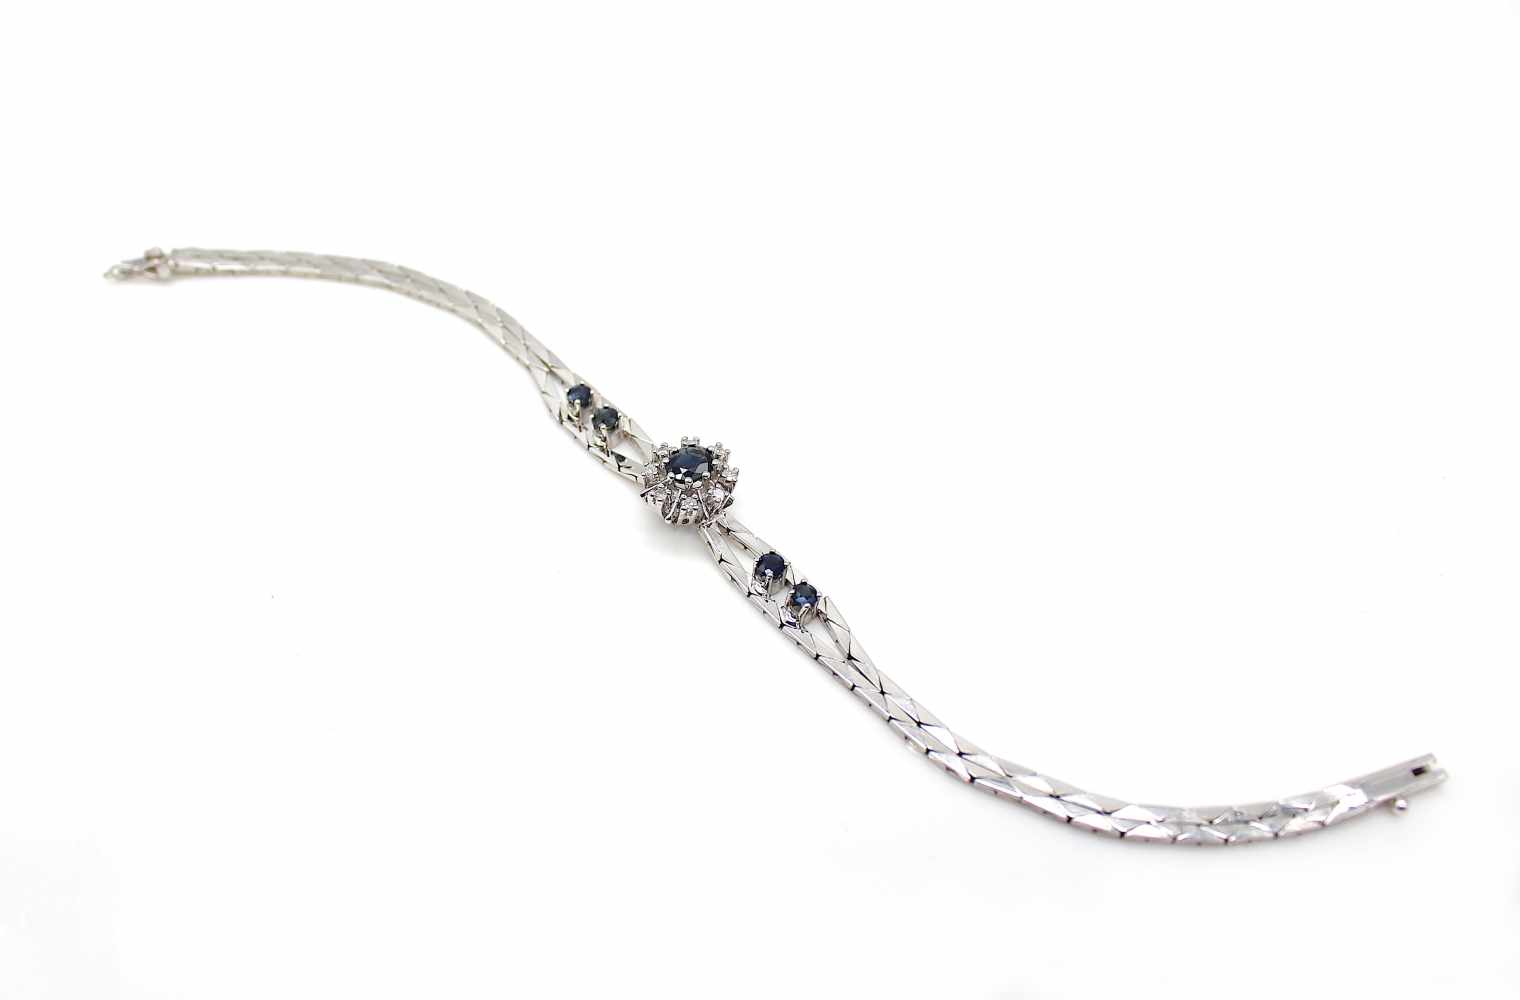 Bracelet in 585 white gold with sapphires, approx. 1.1 ct and diamonds, approx. 0.12 ct in medium - Image 2 of 3